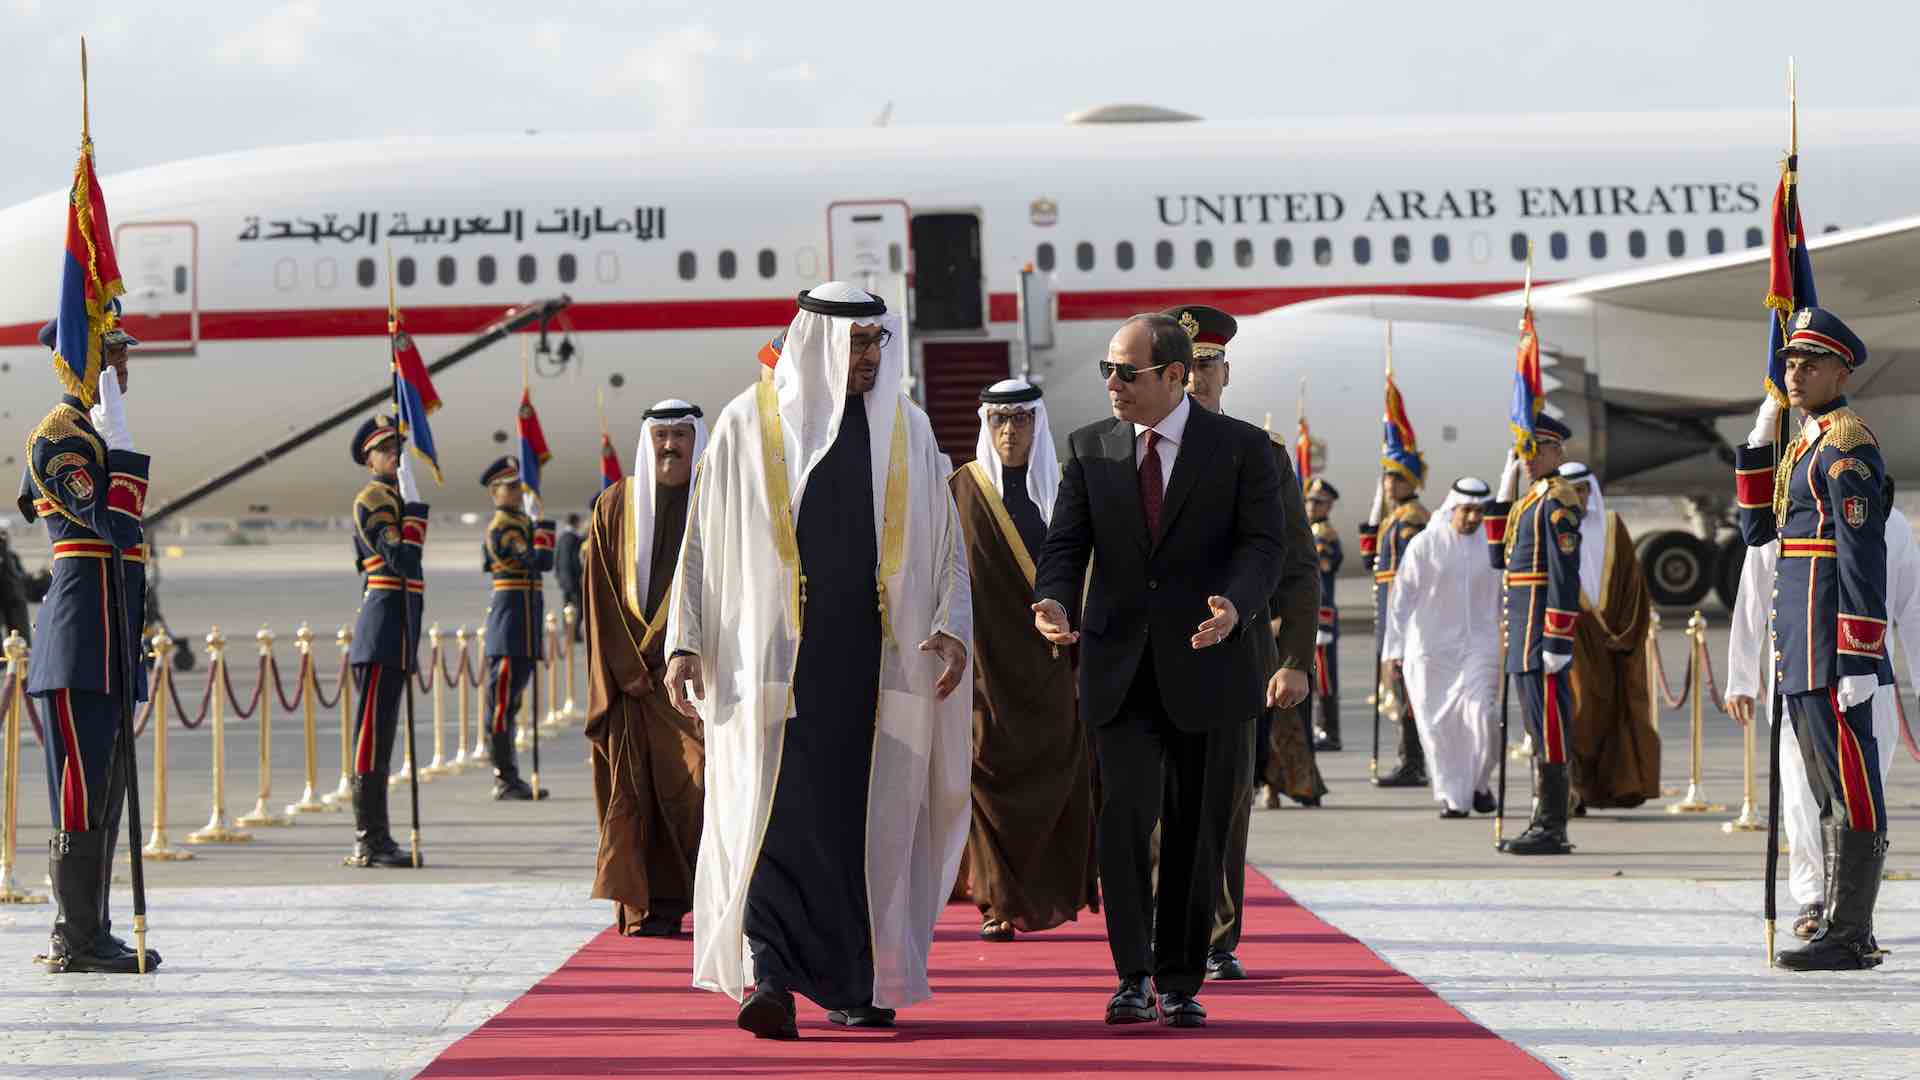 UAE President makes official visit to Egypt to boost bilateral ties